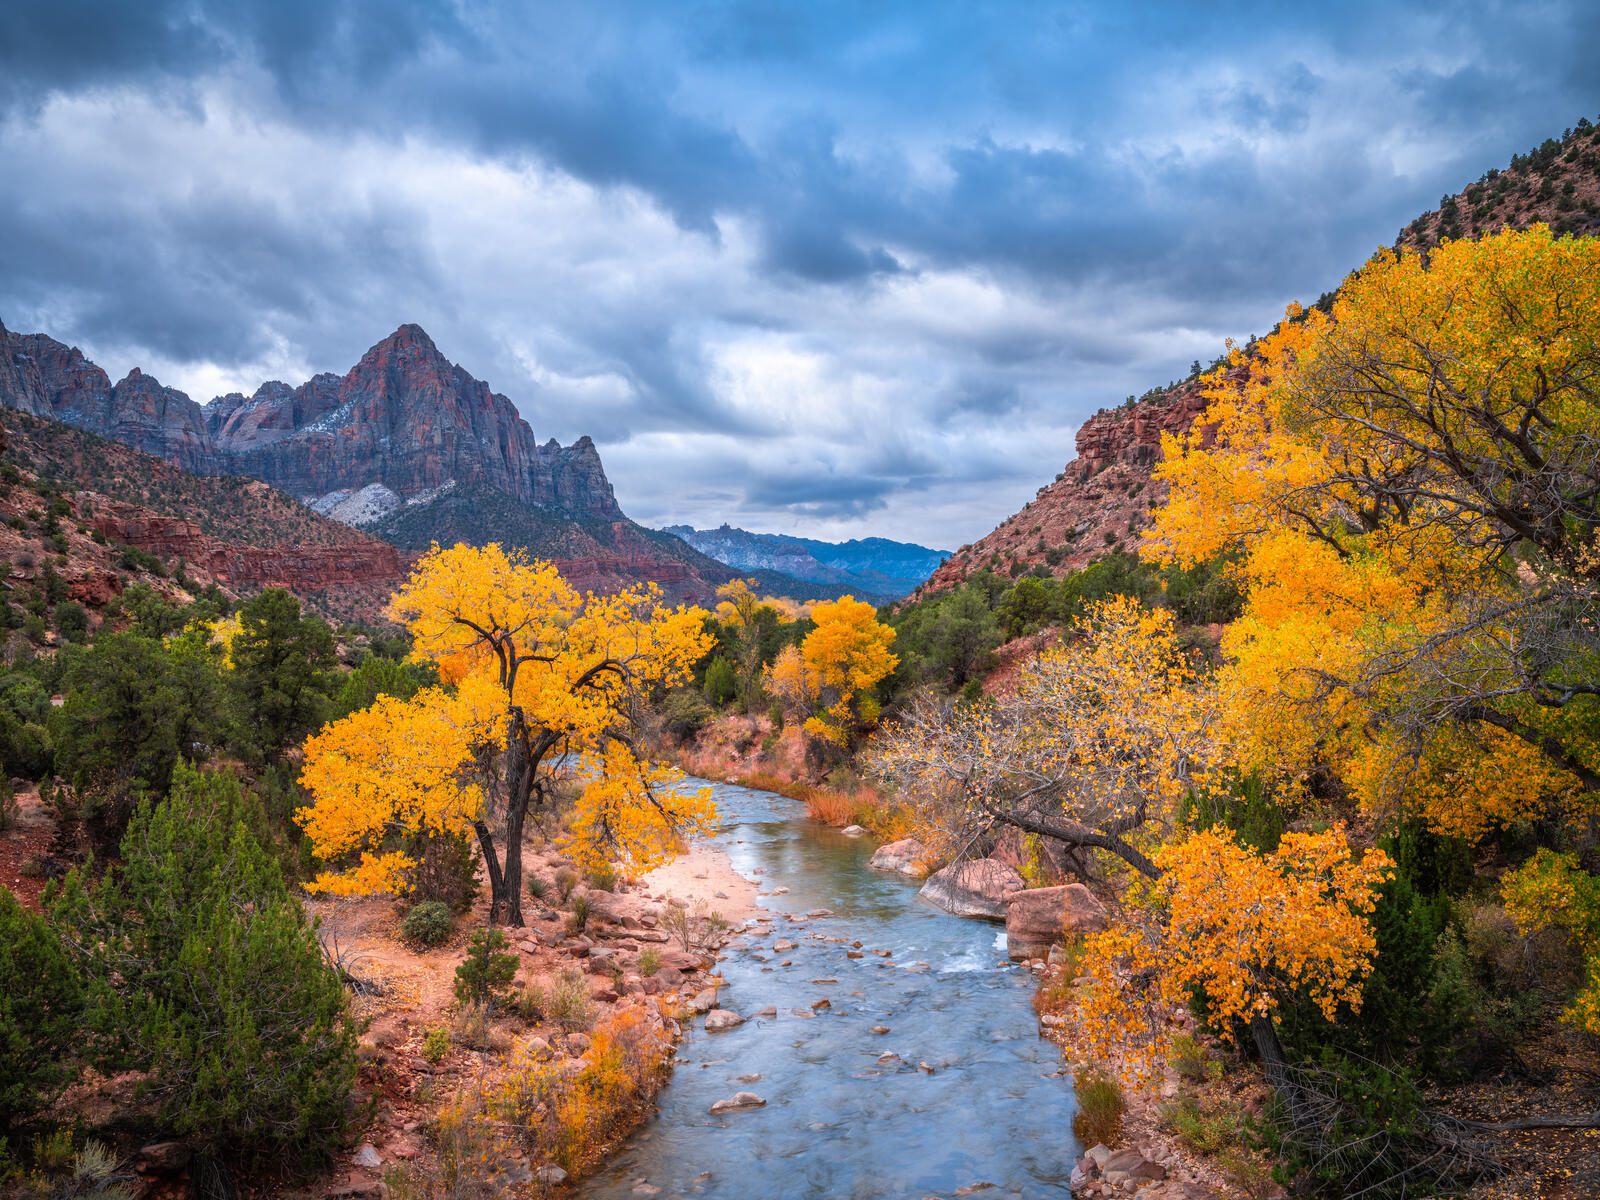 Wallpapers nature zion national park USA on the desktop